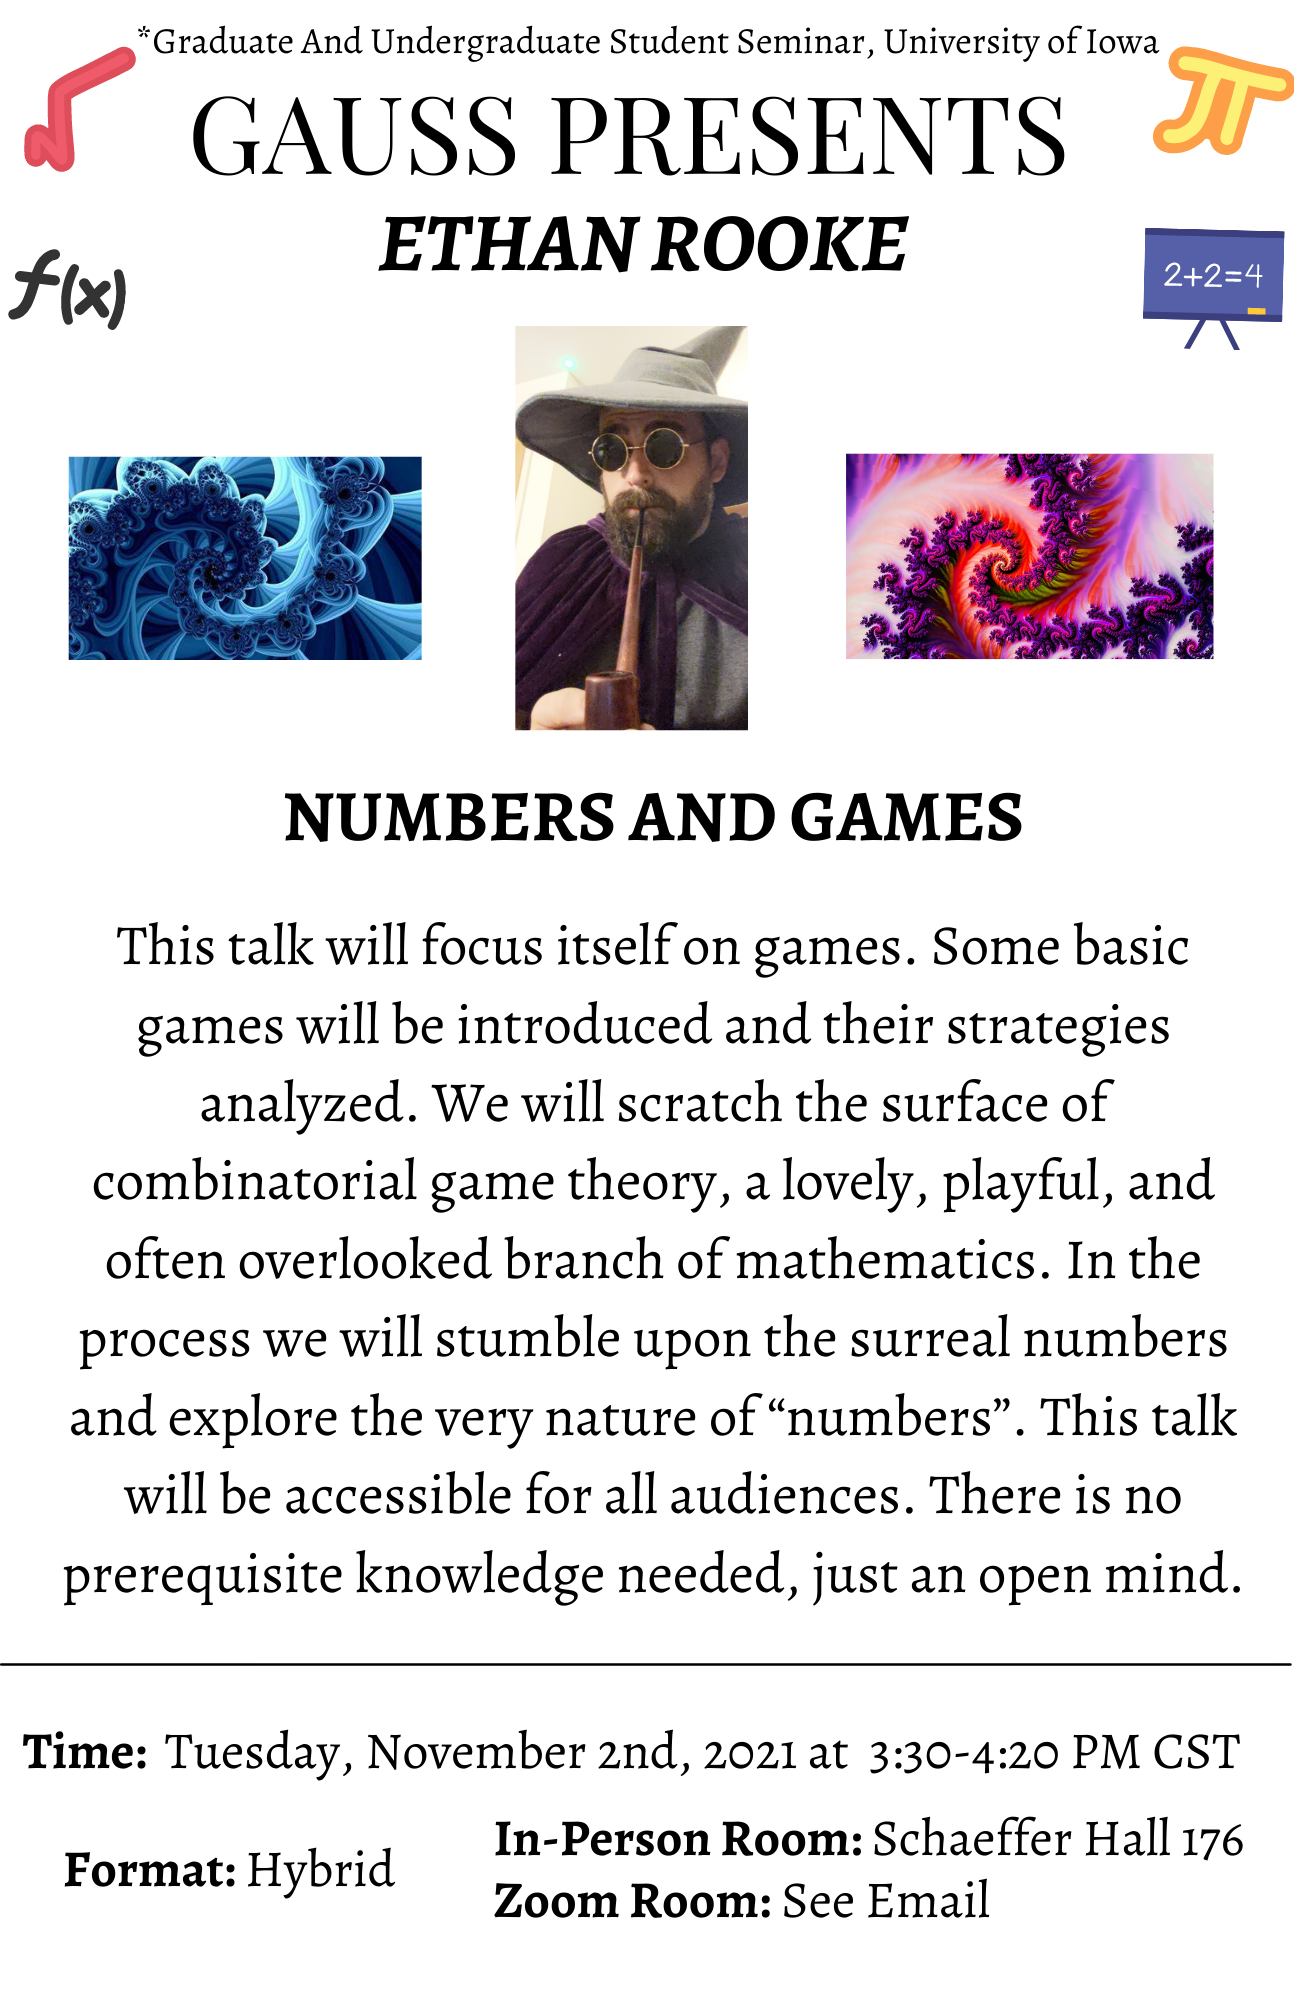 Abstract:  This talk will focus itself on games. Some basic games will be introduced and their strategies analyzed. We will scratch the surface of combinatorial game theory, a lovely, playful, and often overlooked branch of mathematics. In the processumbl